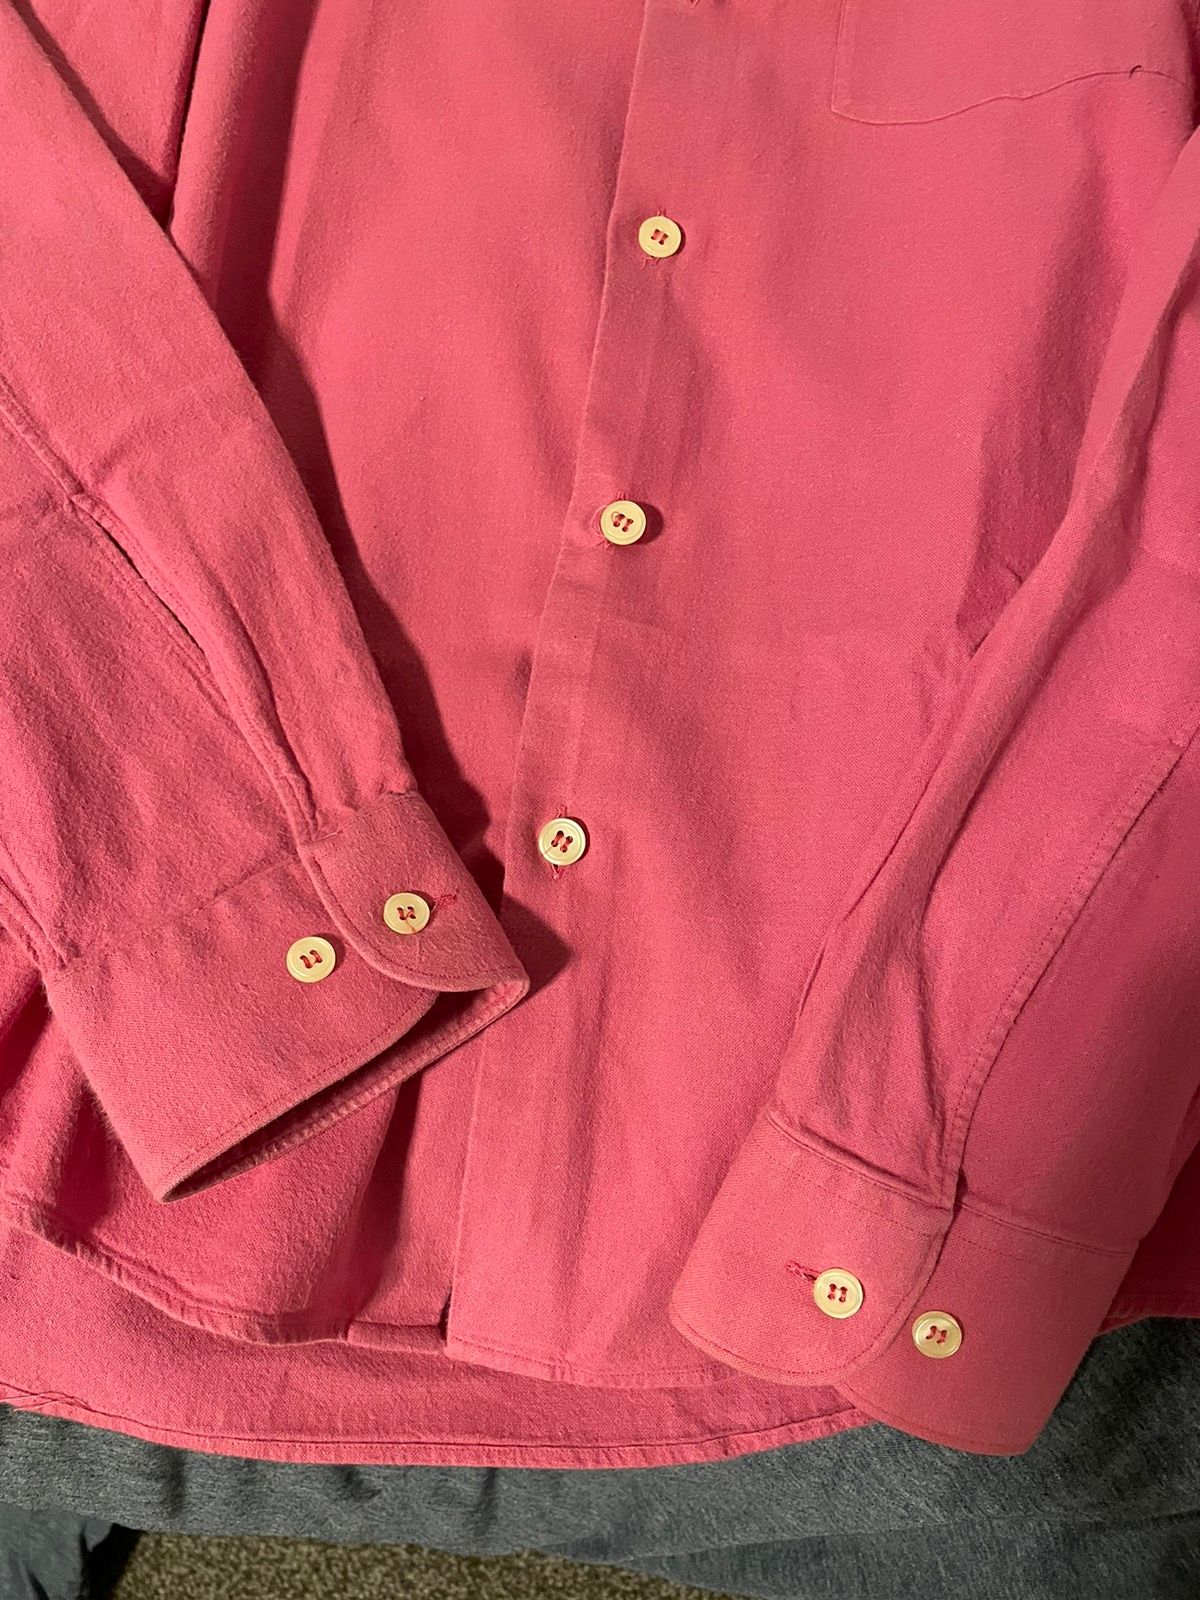 Helmut Lang Early 2000's Pink Brushed Cotton Classic Shirt Size US S / EU 44-46 / 1 - 3 Thumbnail